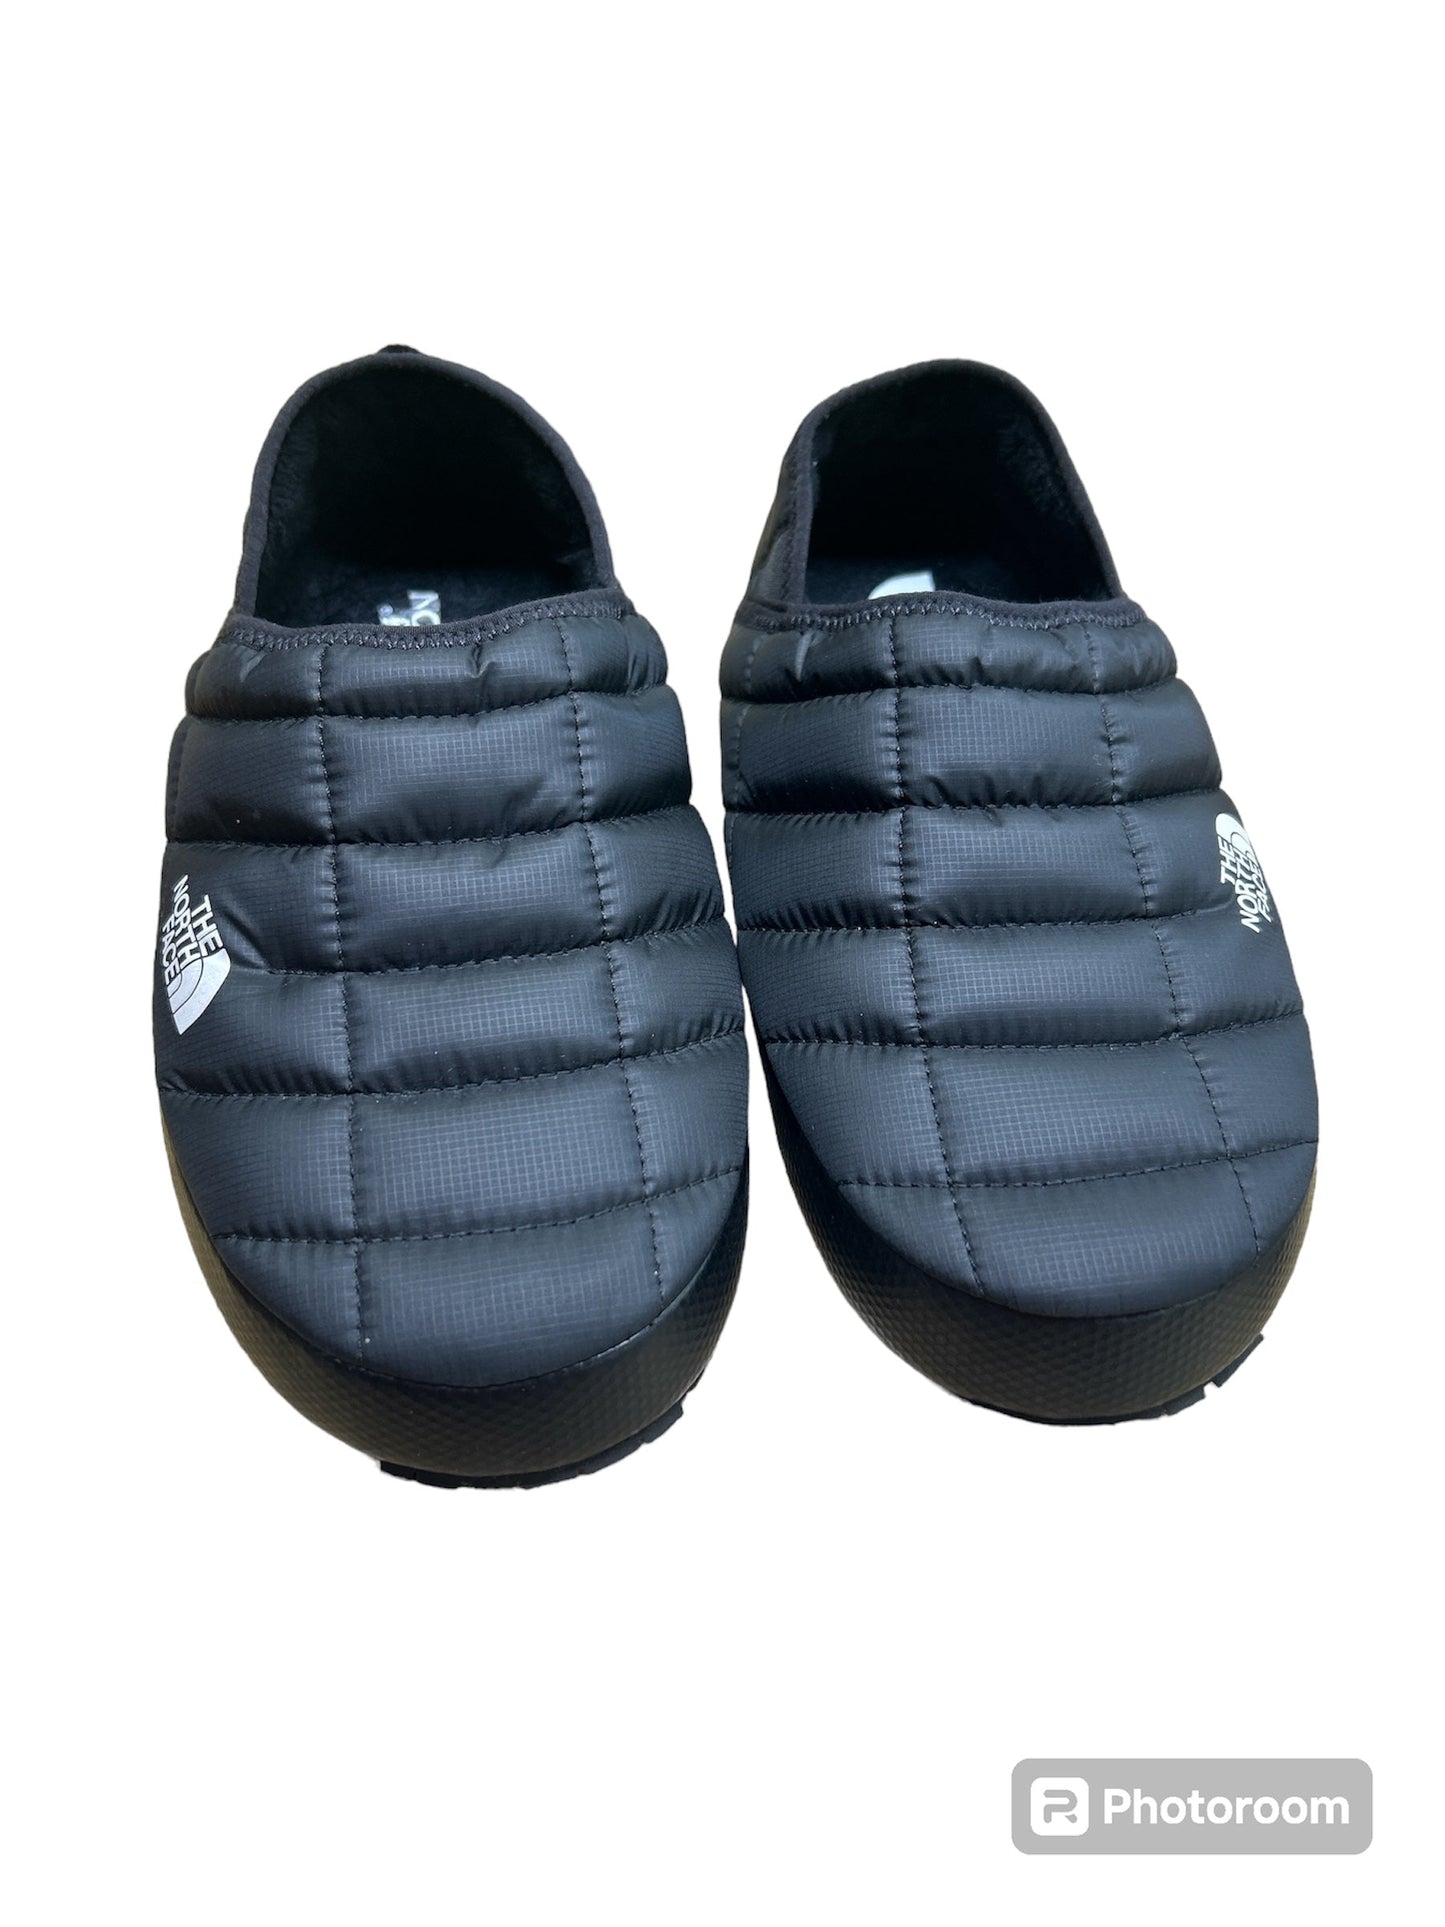 Black Shoes Flats The North Face, Size 7